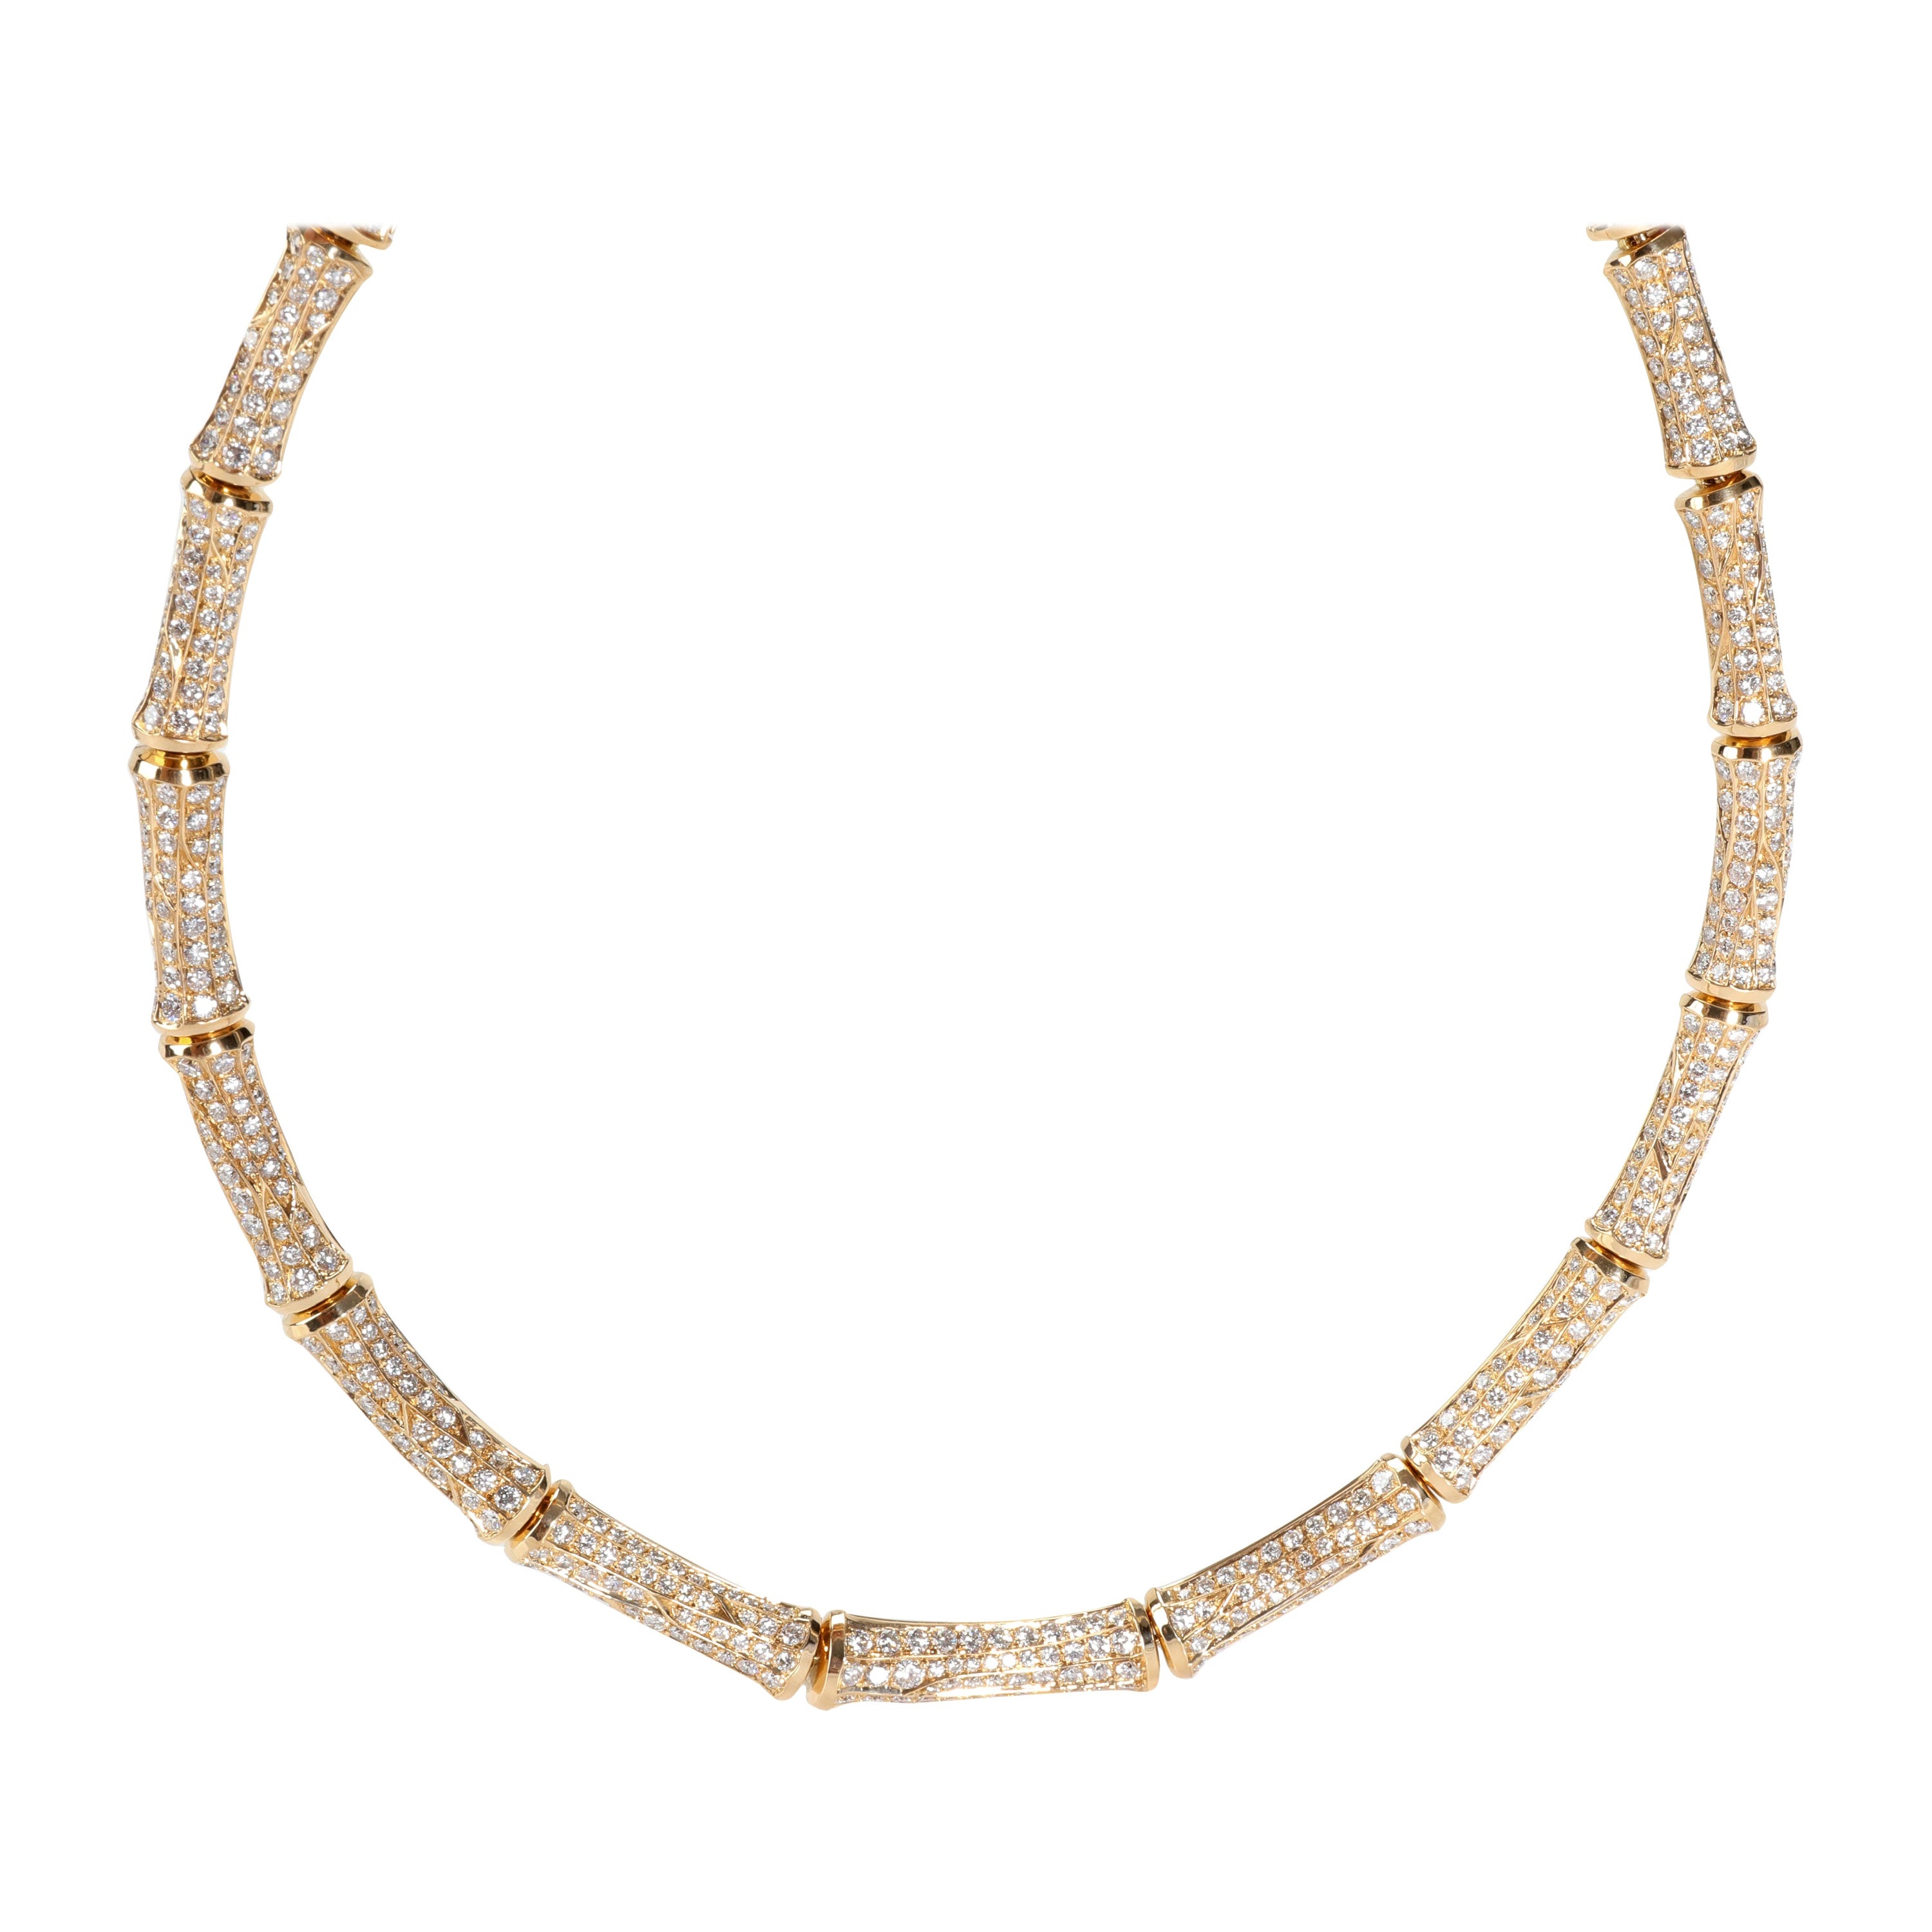 Cartier Bamboo Diamond Necklace in 18K Yellow Gold 22.00 CTW